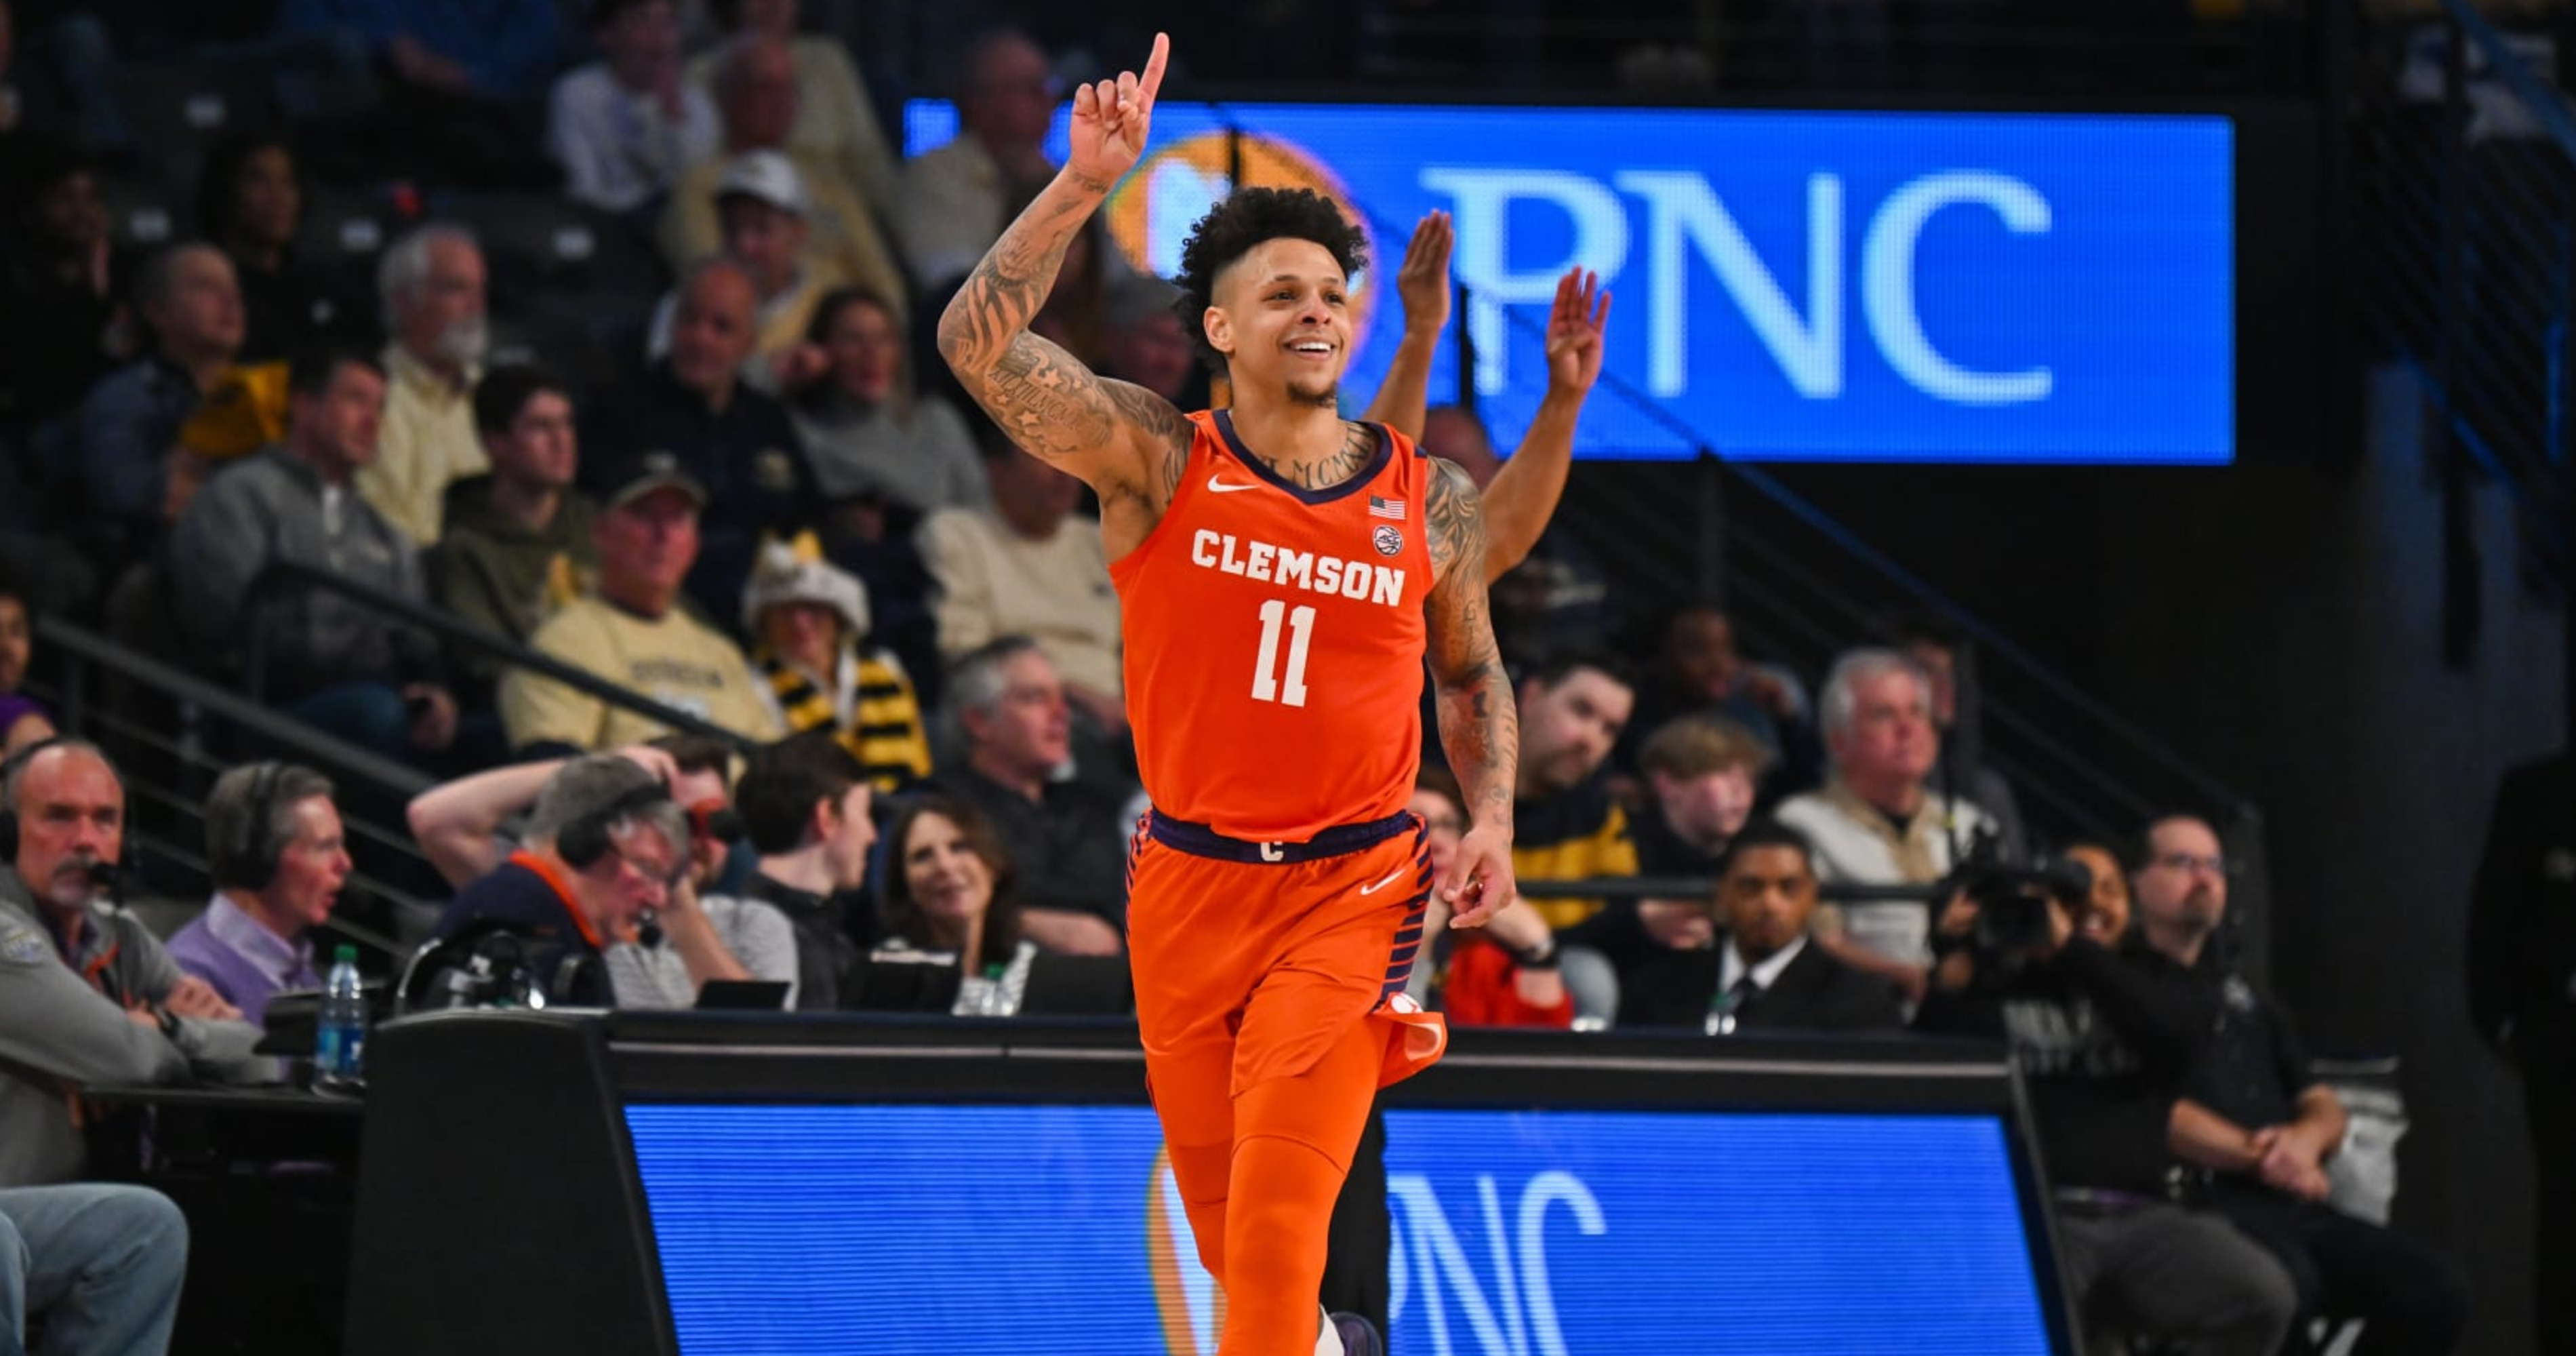 Clemson Basketball: Galloway signs NIL deal with an underwear company